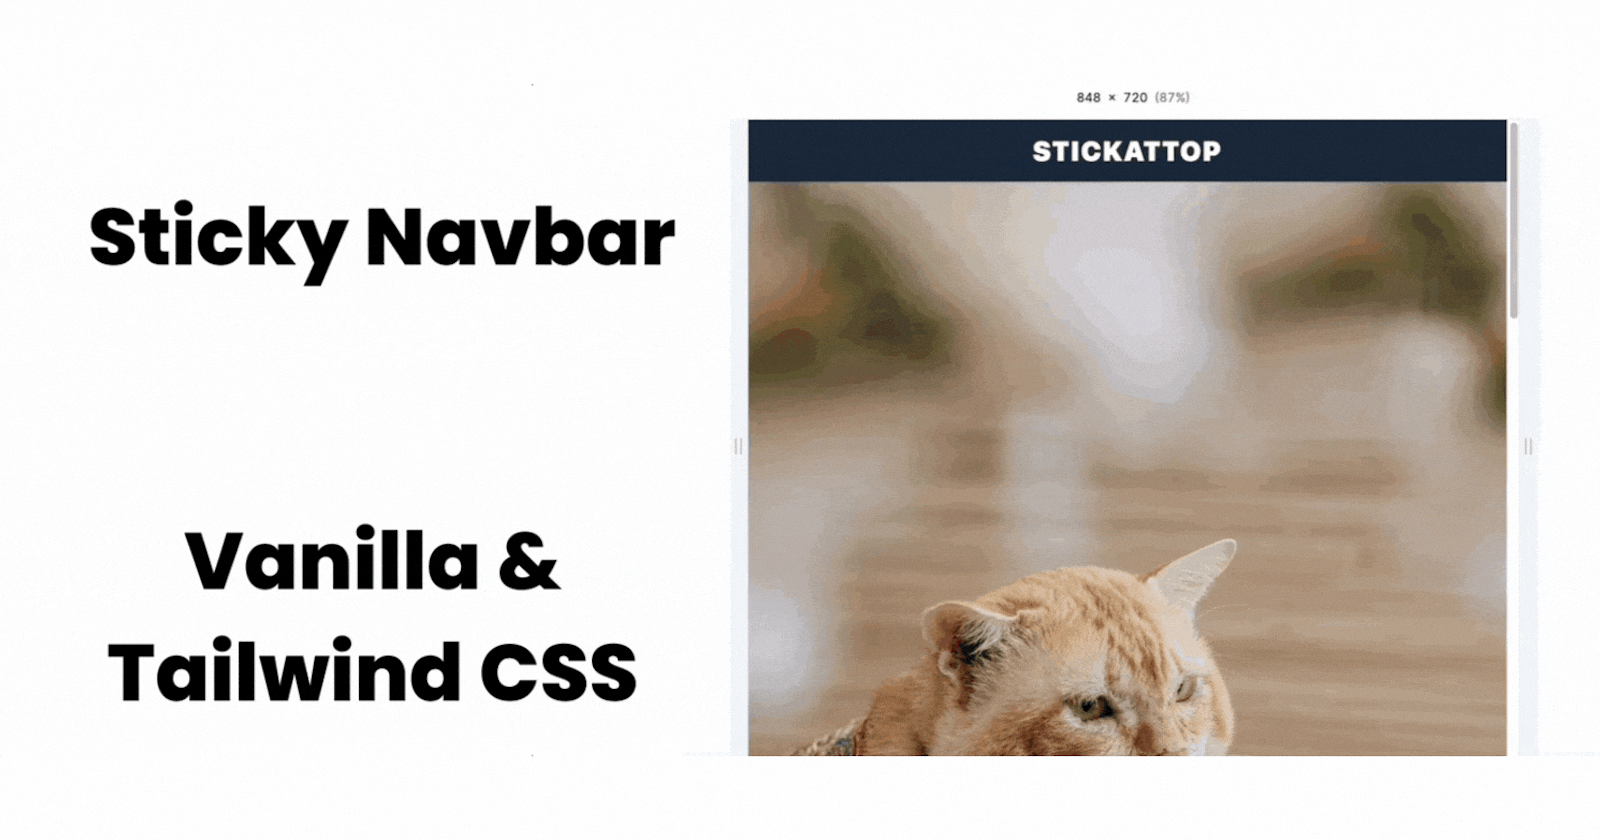 Let's make a sticky/fixed navbar in both Vanilla & Tailwind CSS